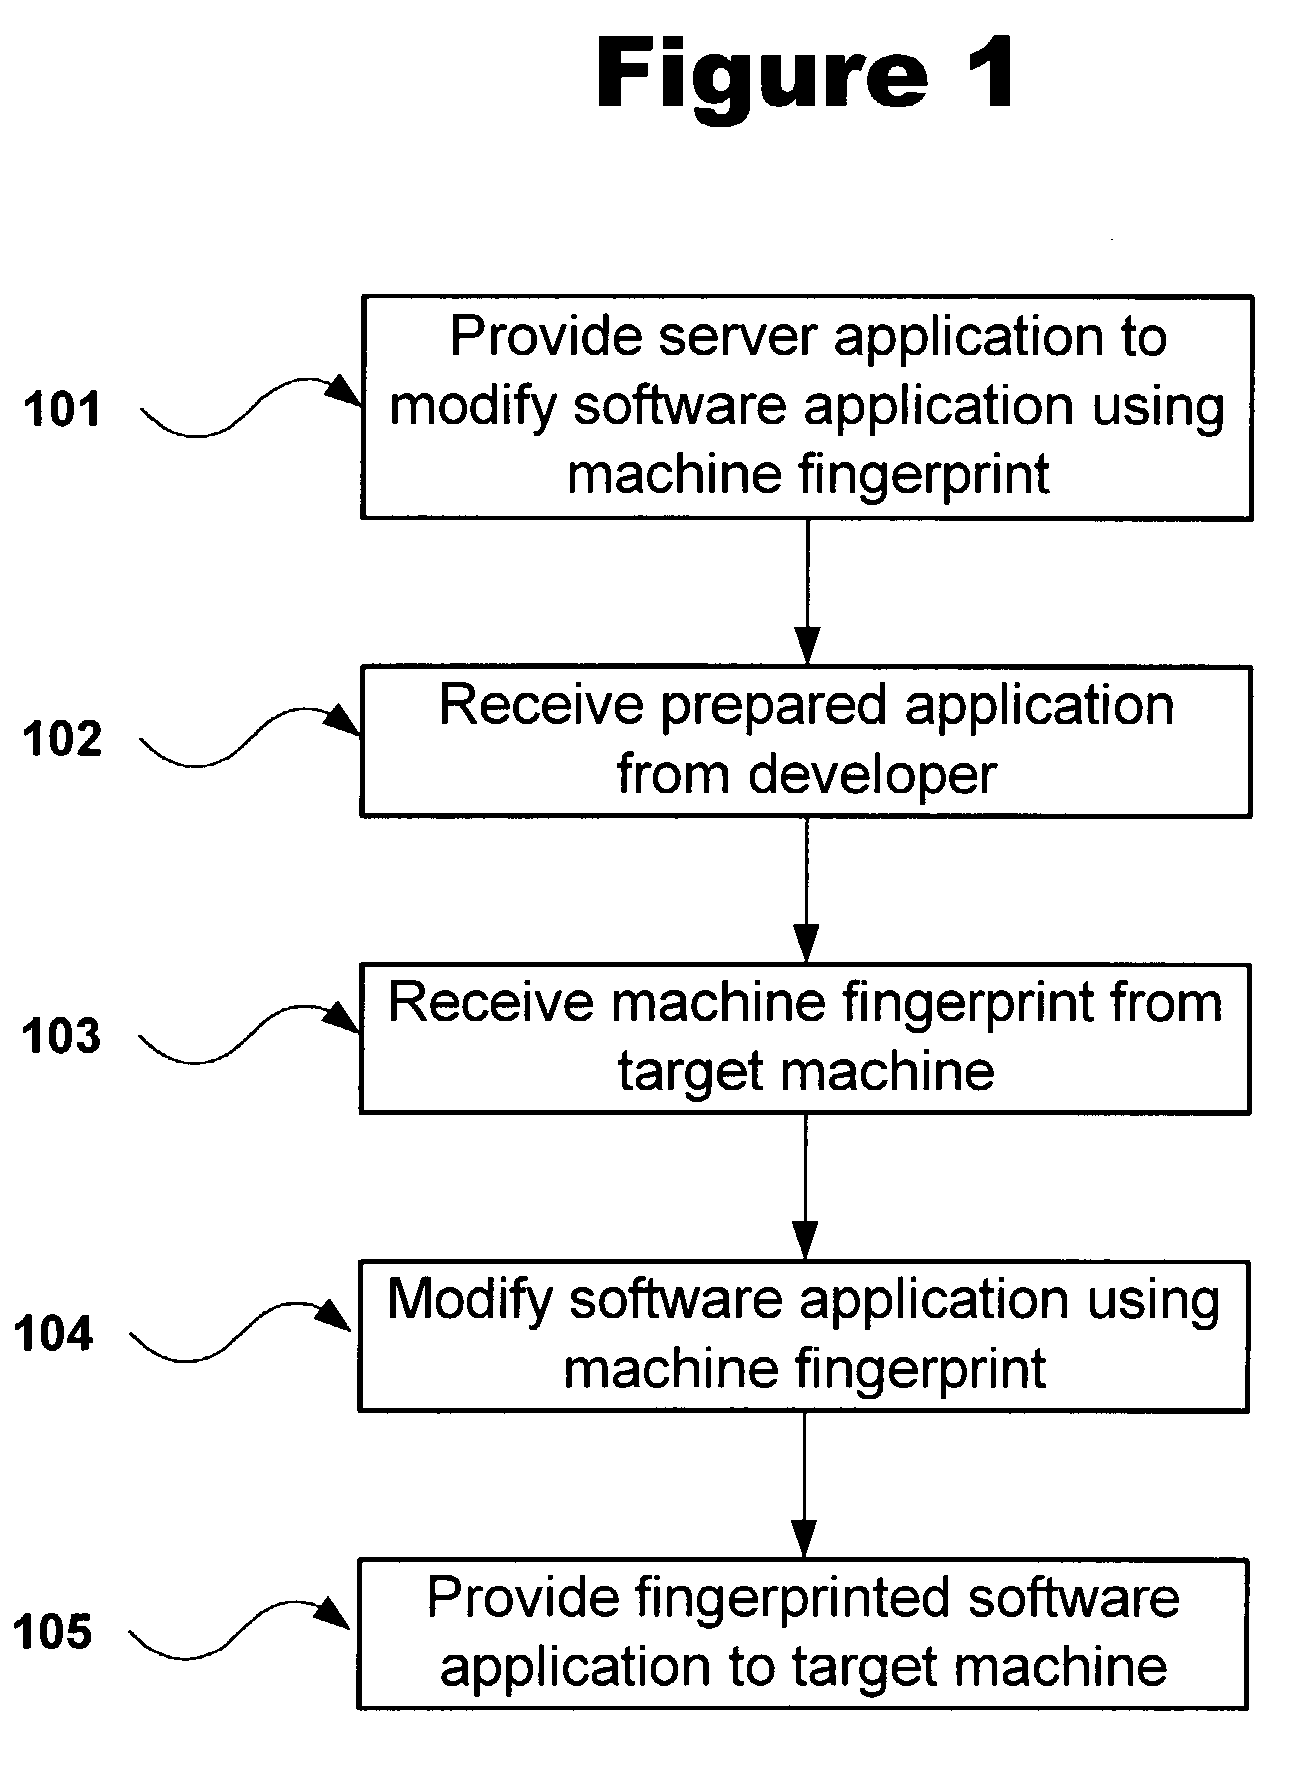 Protecting software from unauthorized use by applying machine-dependent modifications to code modules